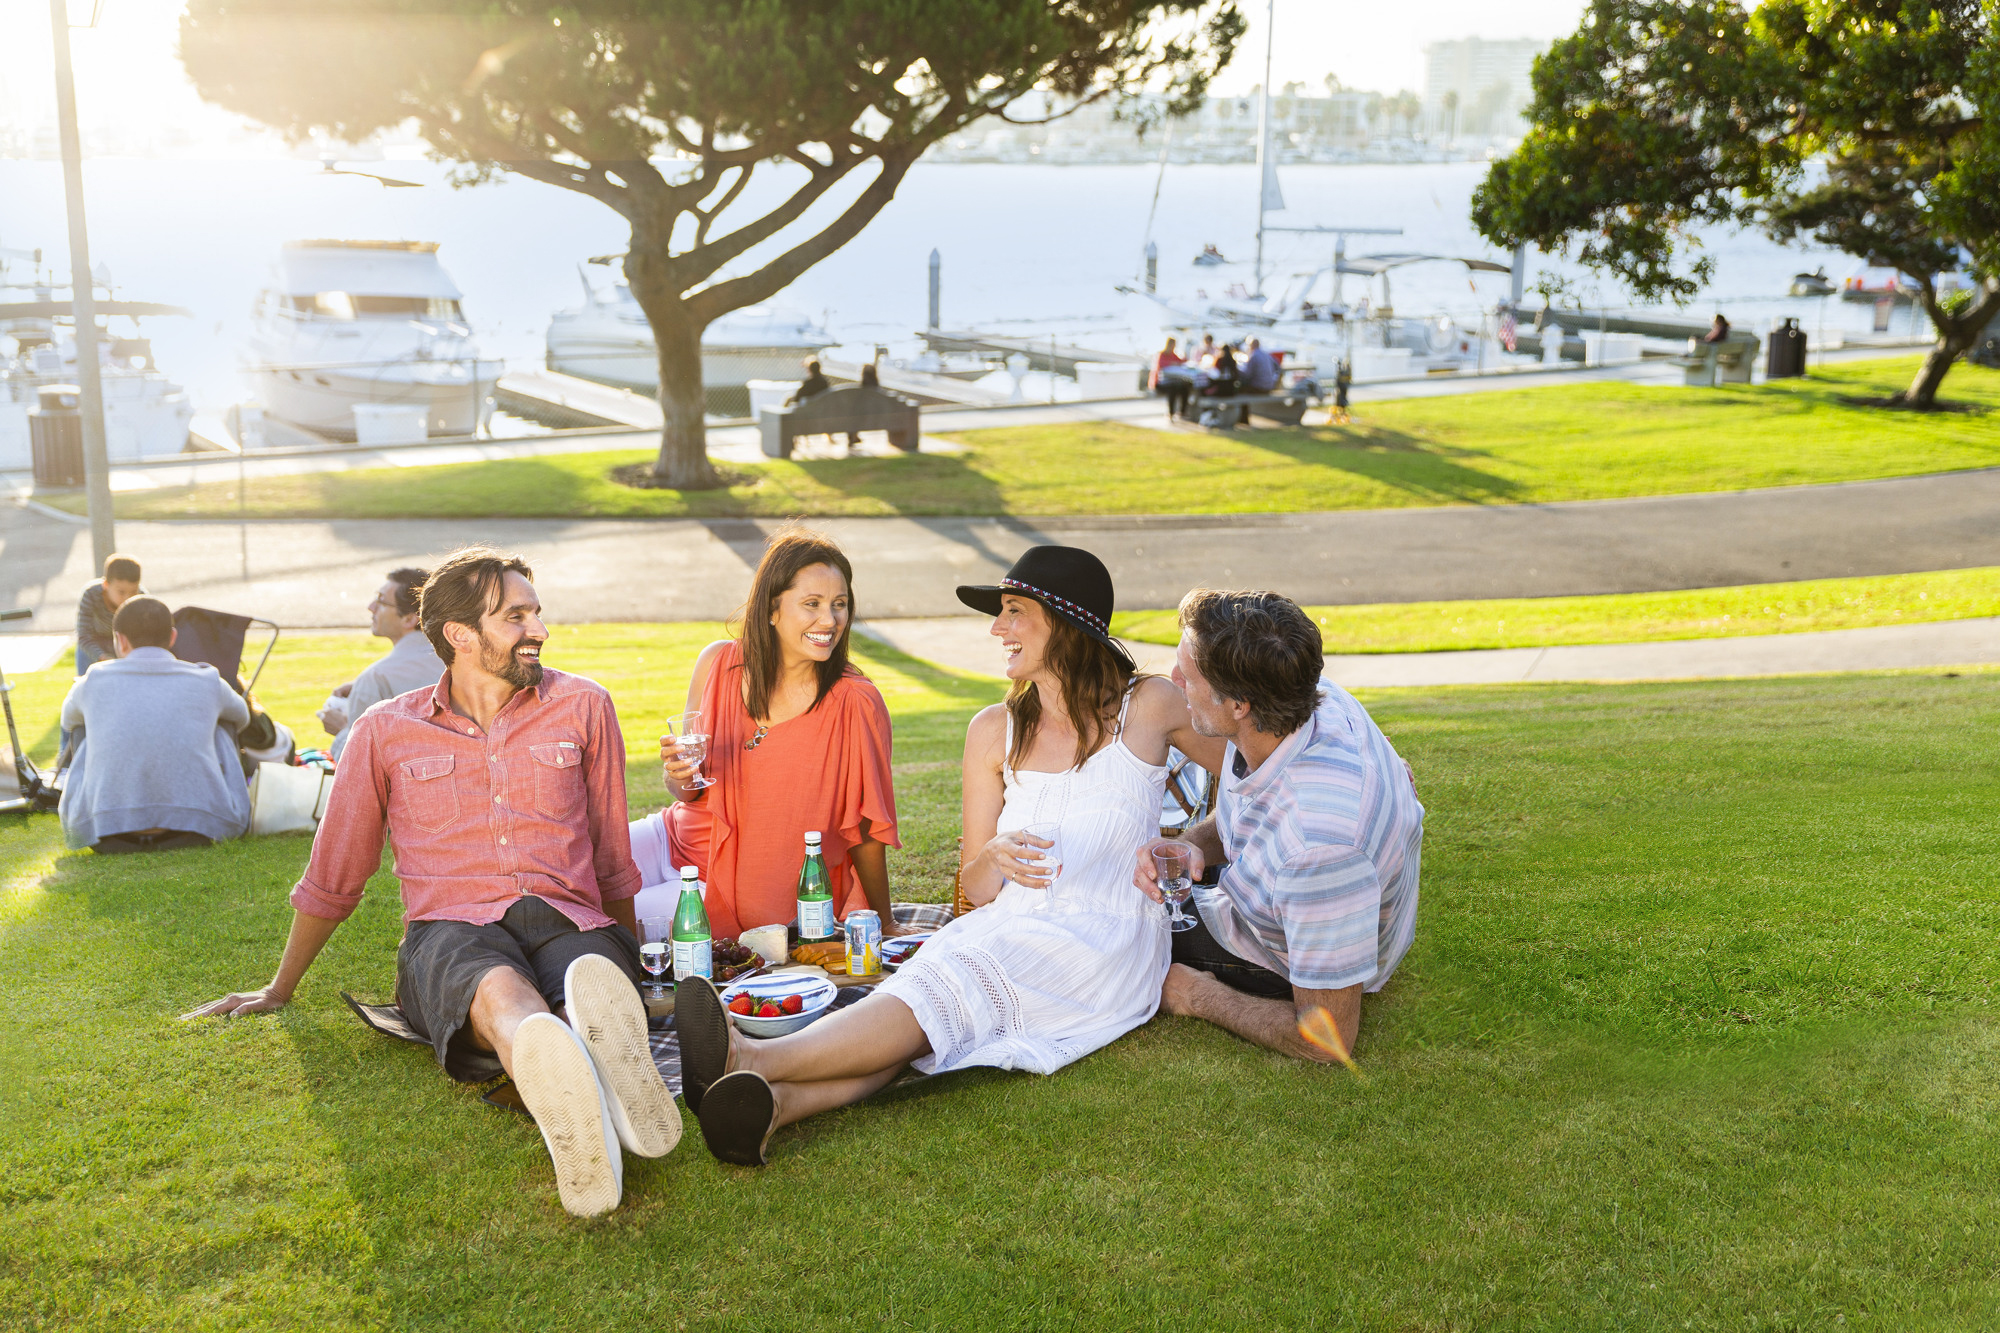 Group of friends enjoying picnic at park overlooking boats and the harbor